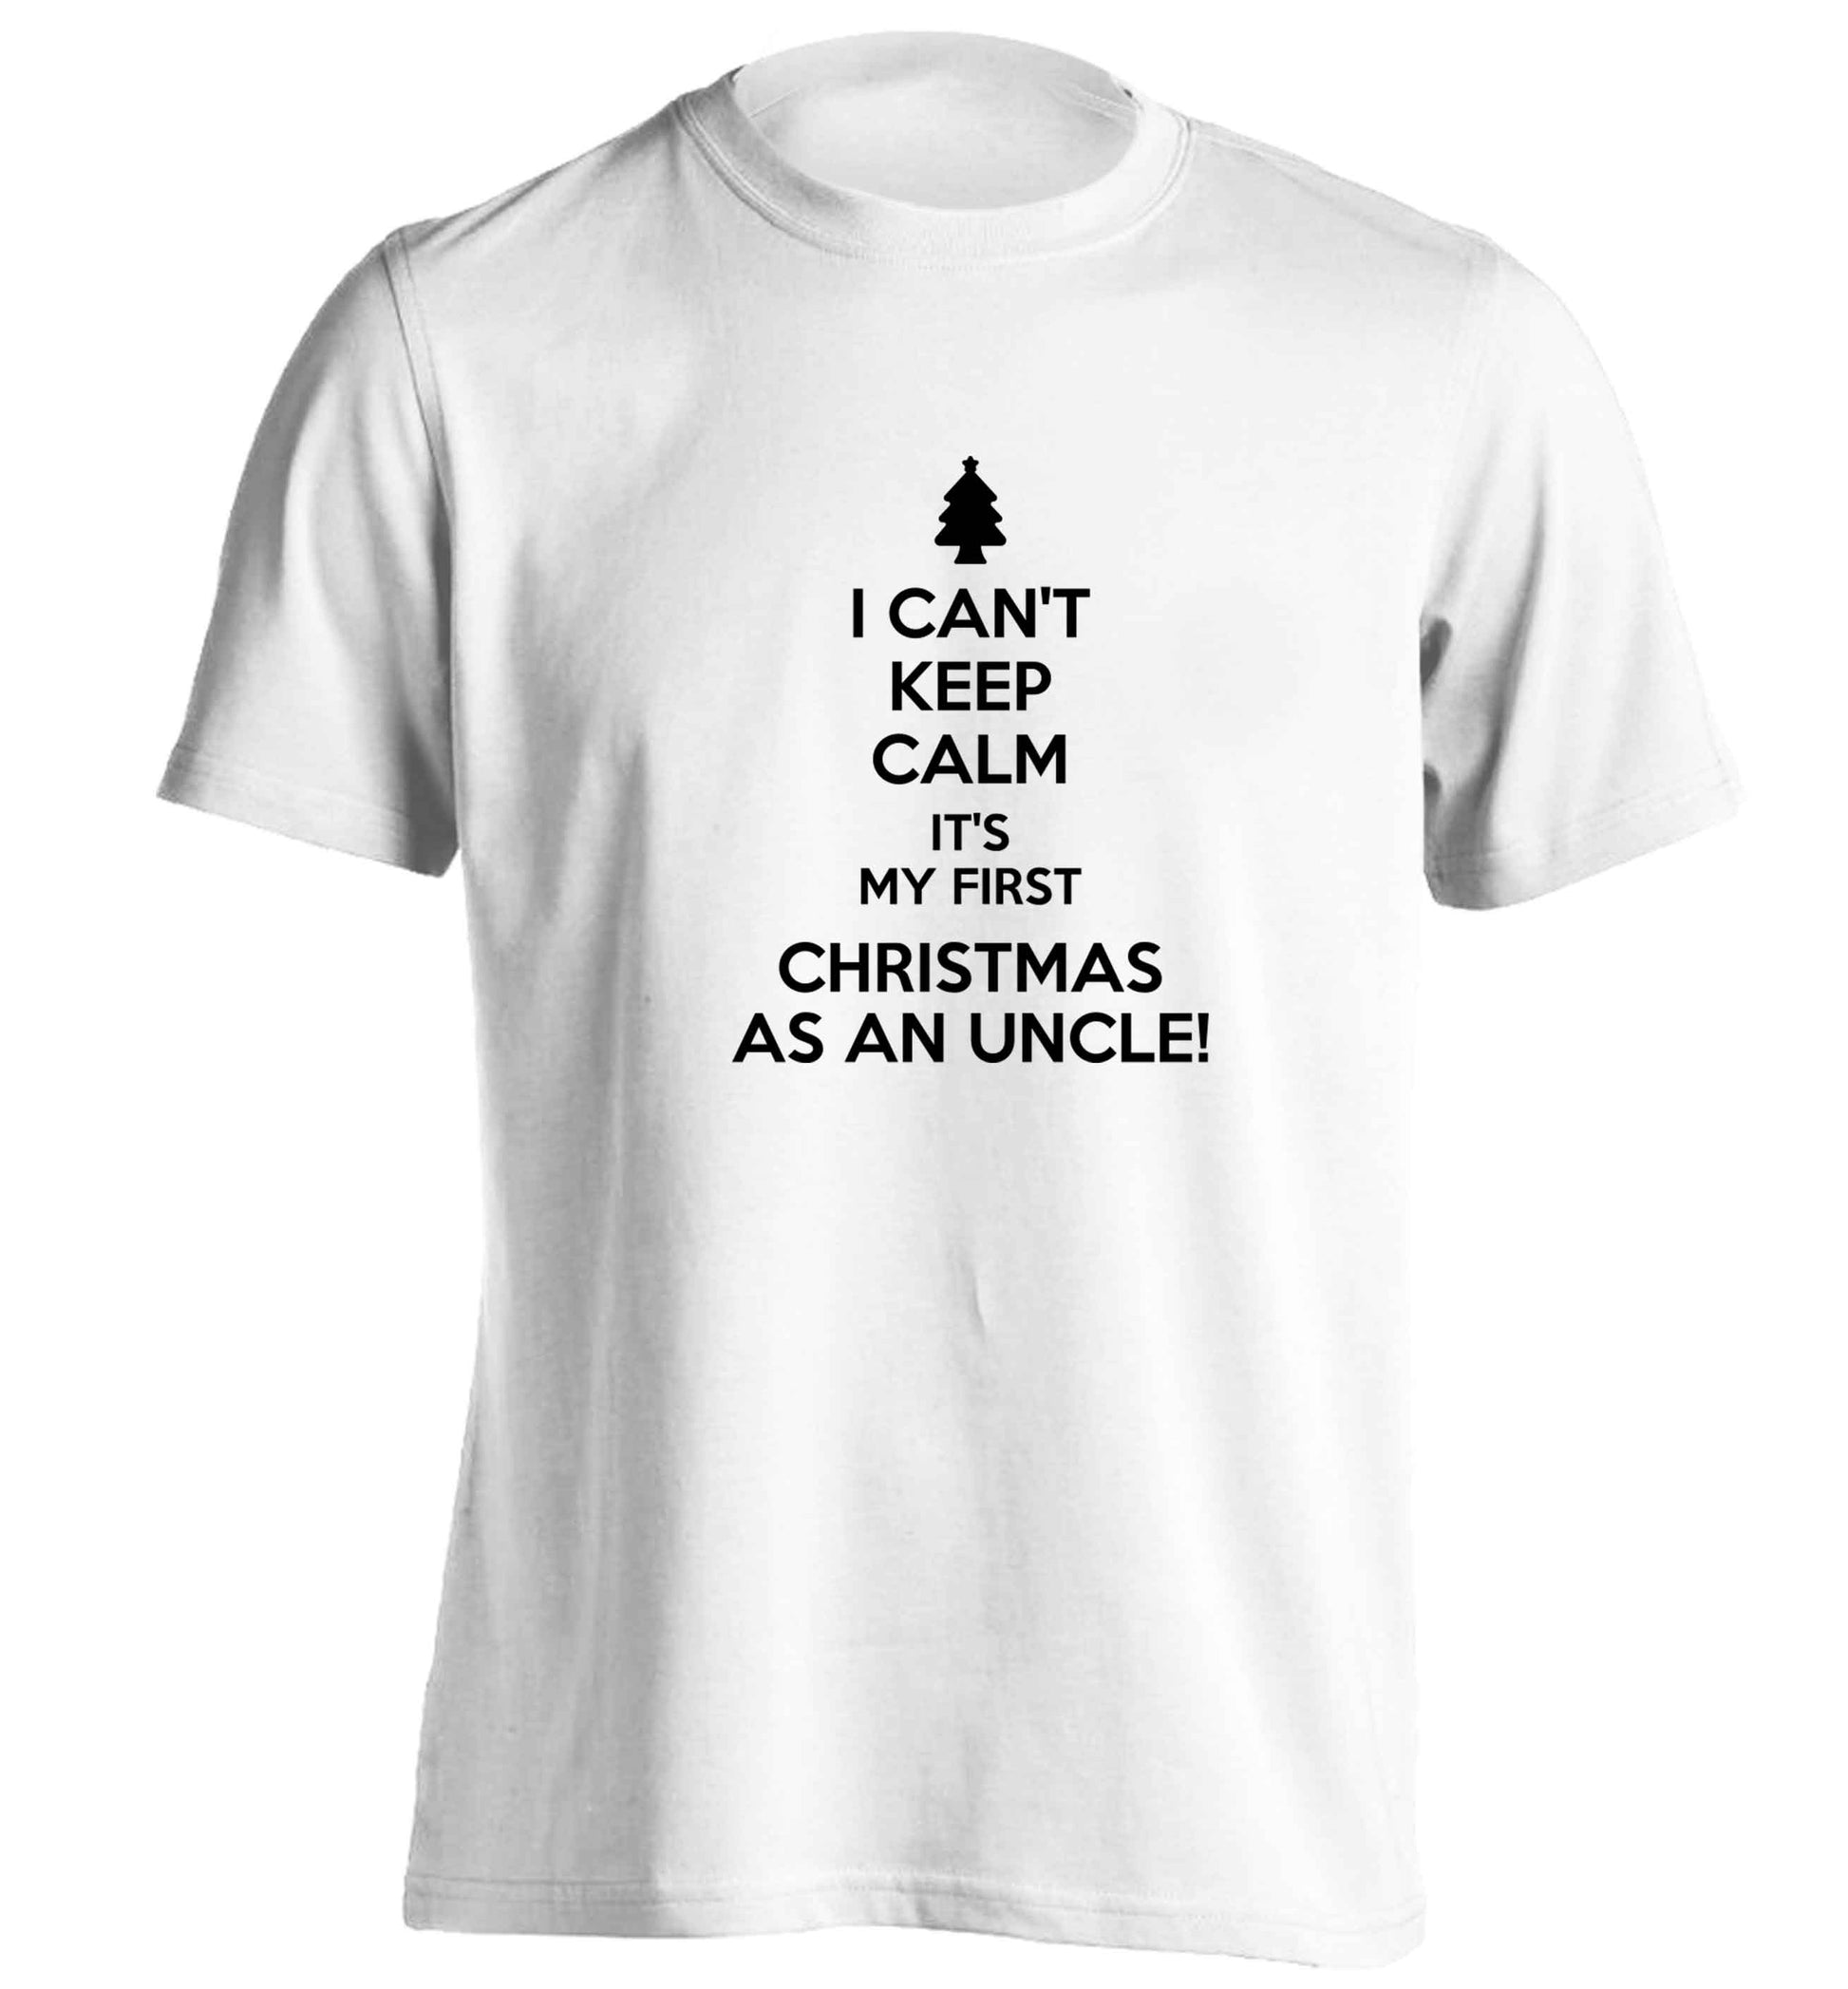 I can't keep calm it's my first Christmas as an uncle! adults unisex white Tshirt 2XL